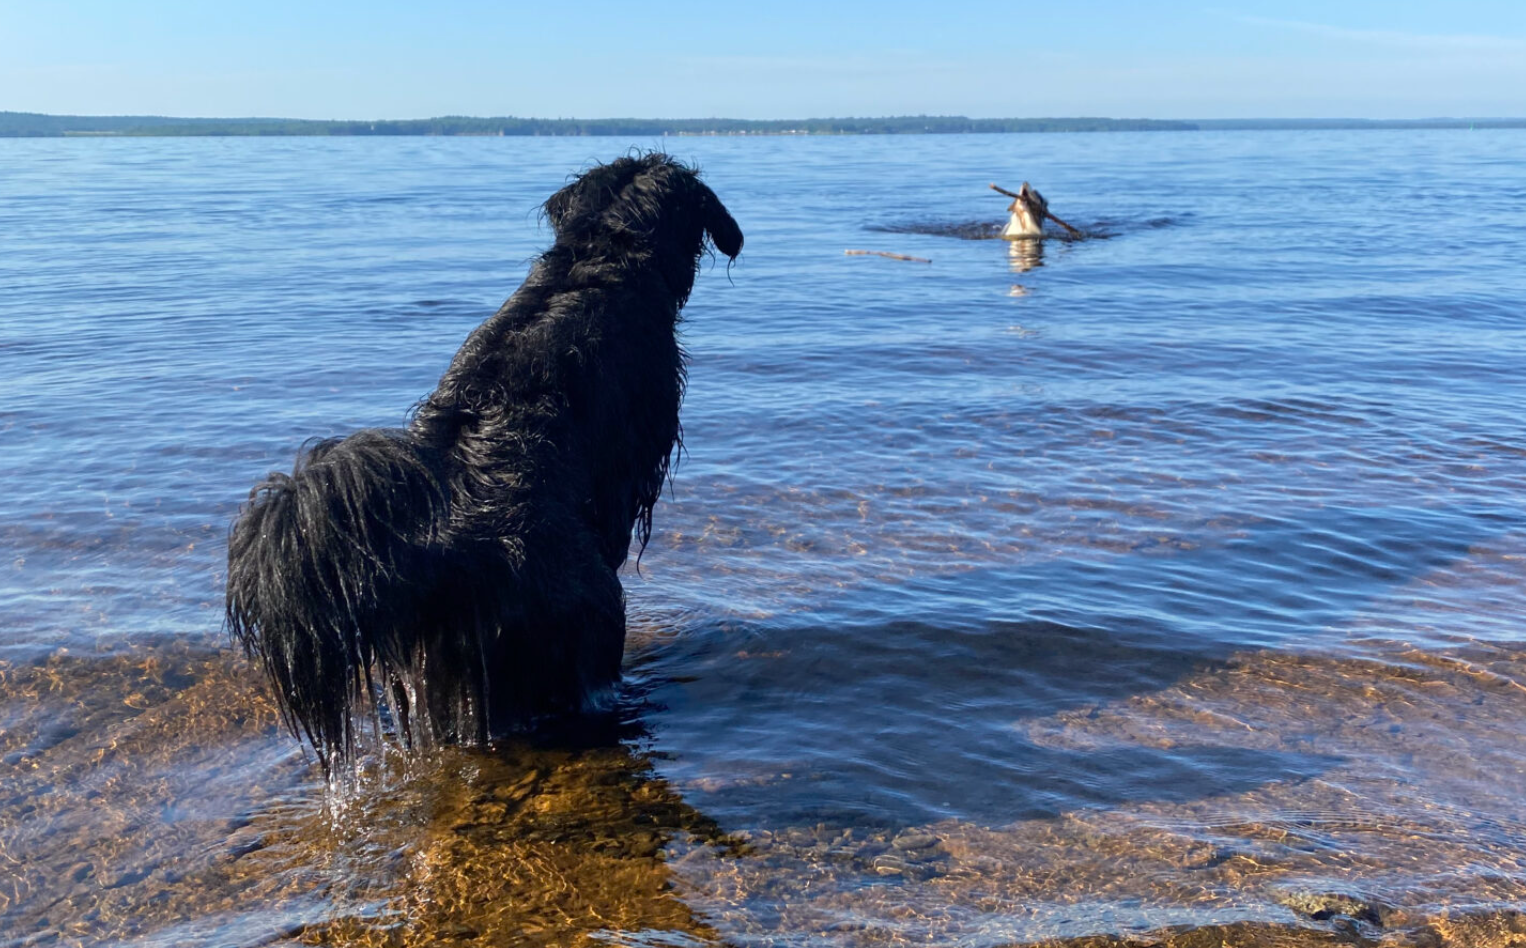 dogs playing in a cove, dog swimming, dog fetching a stick